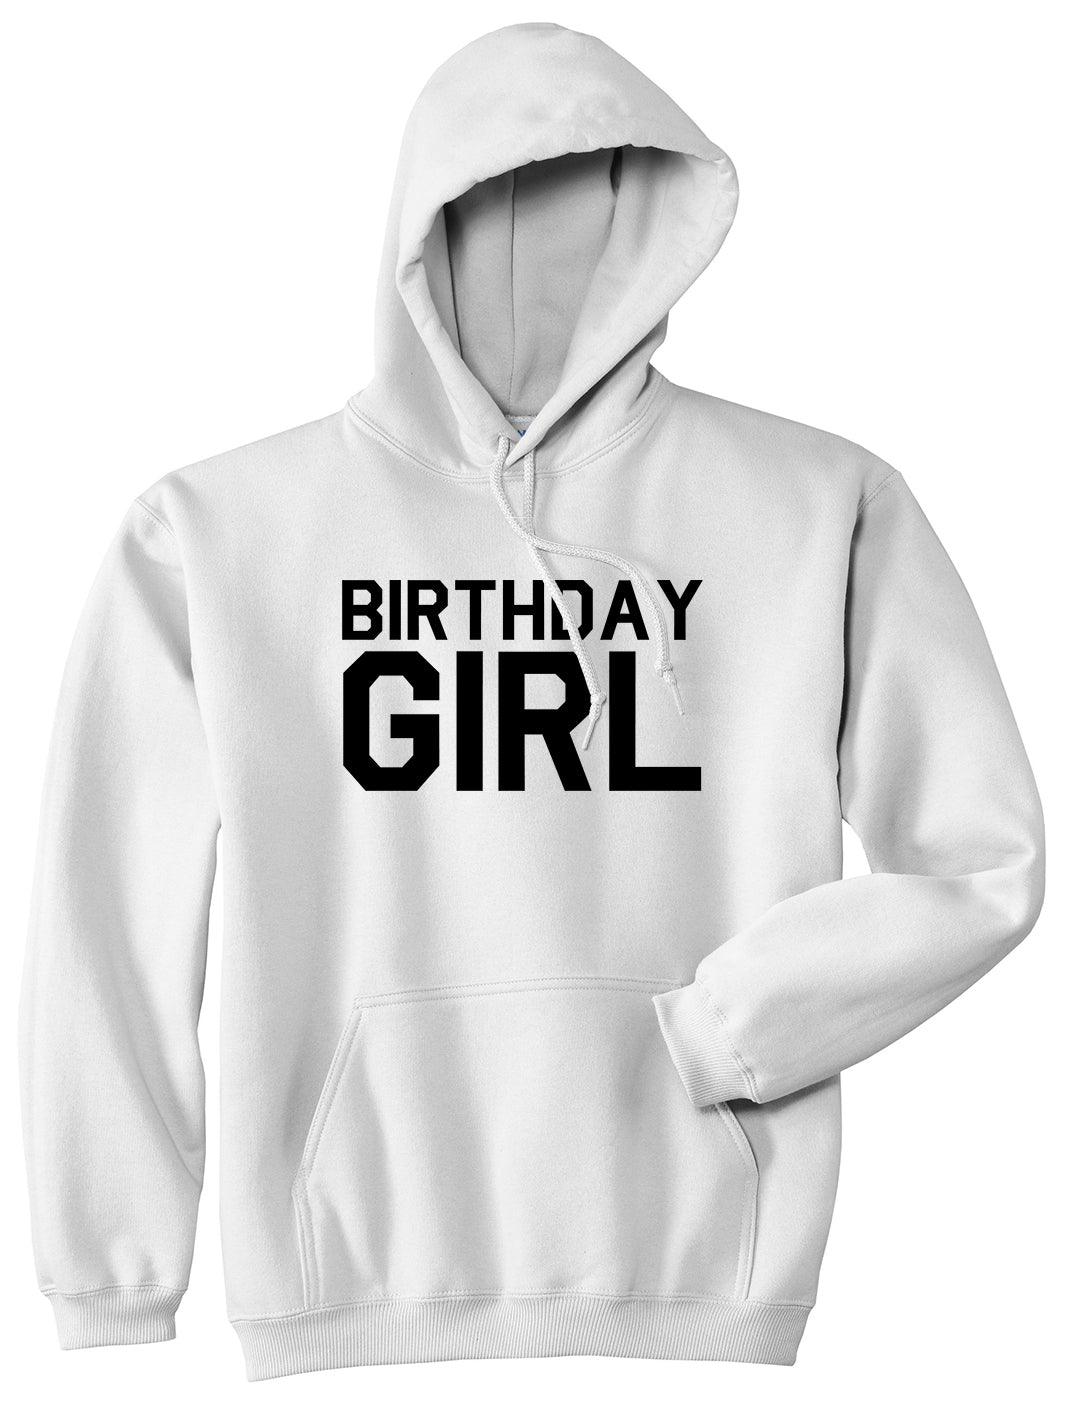 Birthday Girl White Pullover Hoodie by Kings Of NY